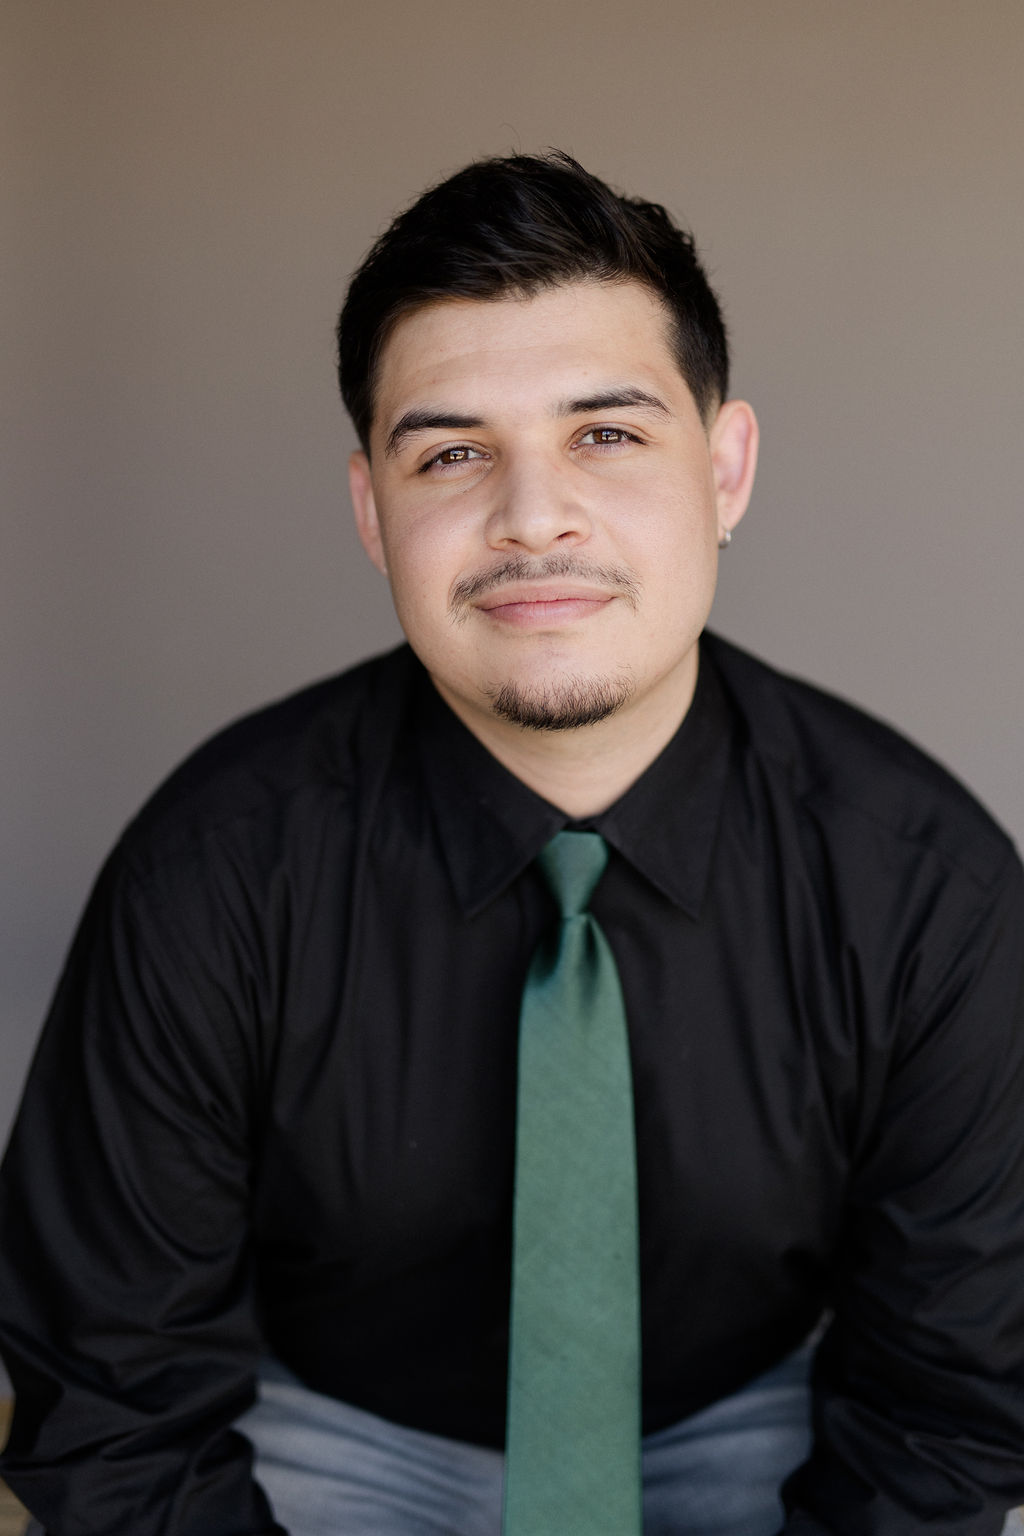 Johnny Flores, Case Manager